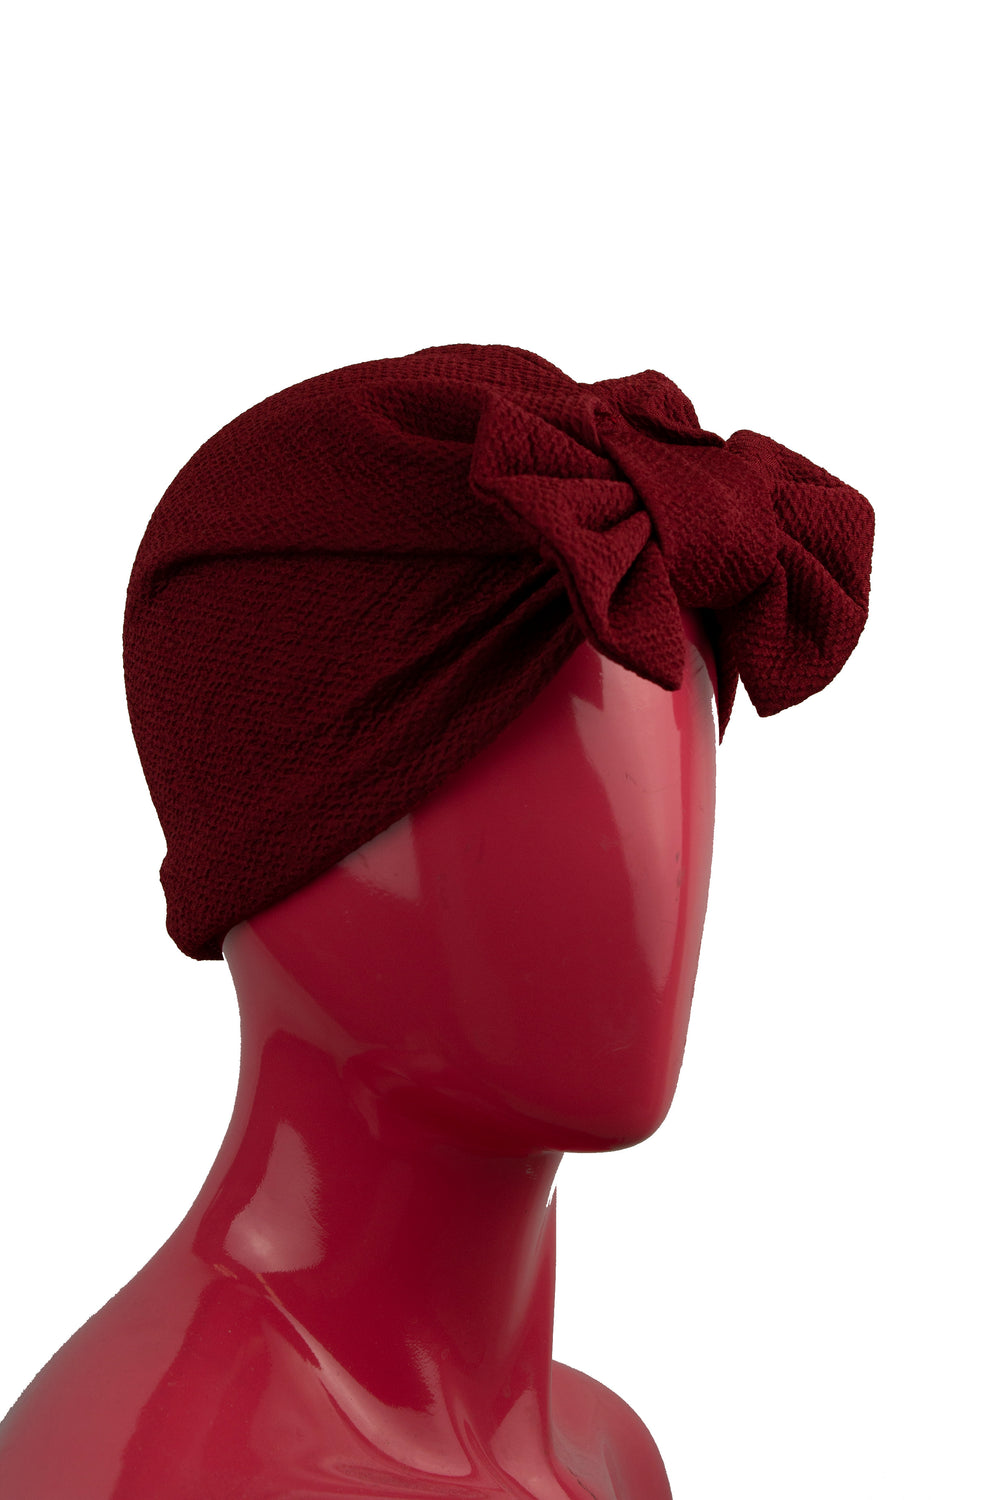 maroon slip on turban with a large bow on the front